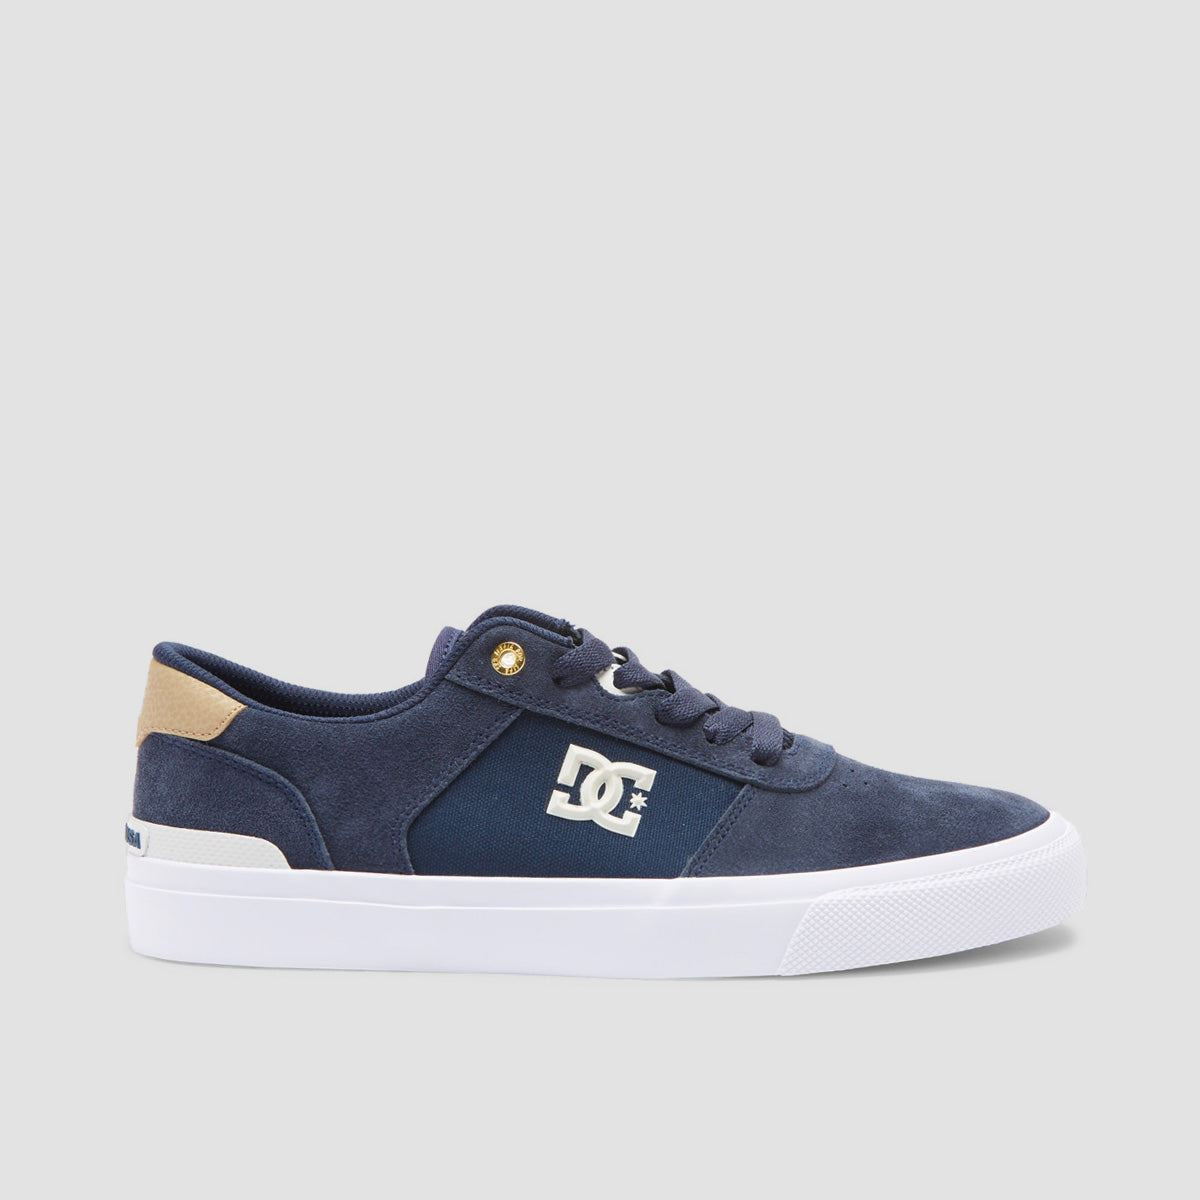 DC Teknic S Wes Shoes - DC Navy/White